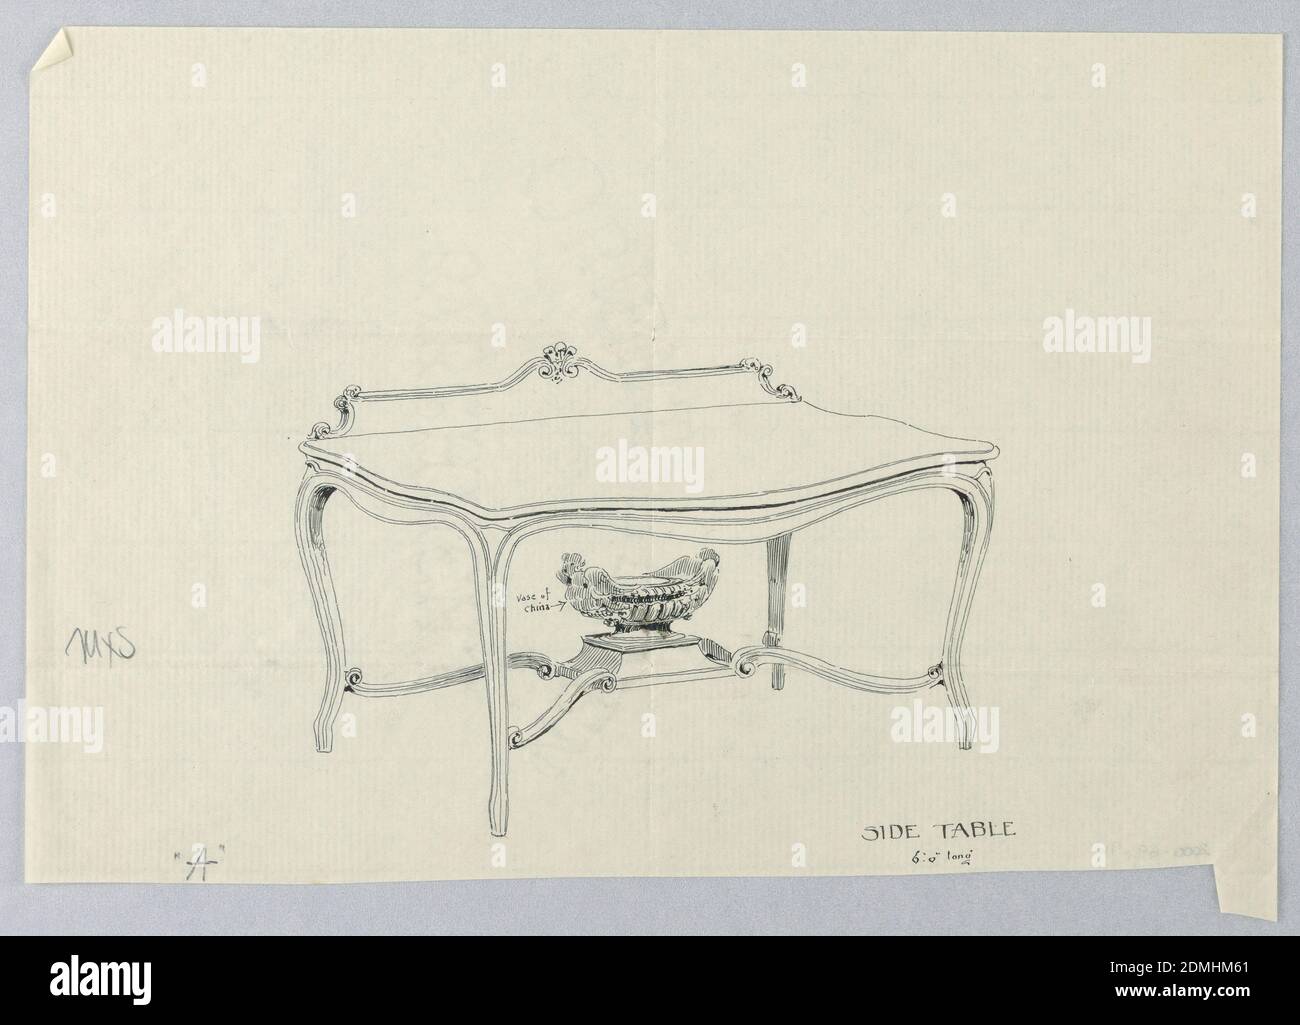 Design for Side Serving Table displaying a Vase of China, A.N. Davenport Co., Pen and black ink on thin, cream paper, Table surface (with curved skirting) and back splash supported by four cabriole legs joined by four scrolling stretchers supporting an elaborate urn-shaped vase on a pedestal. Back splash is decorated with three-plumed carving at center, and scrolls on each side., 1900–05, furniture, Drawing Stock Photo